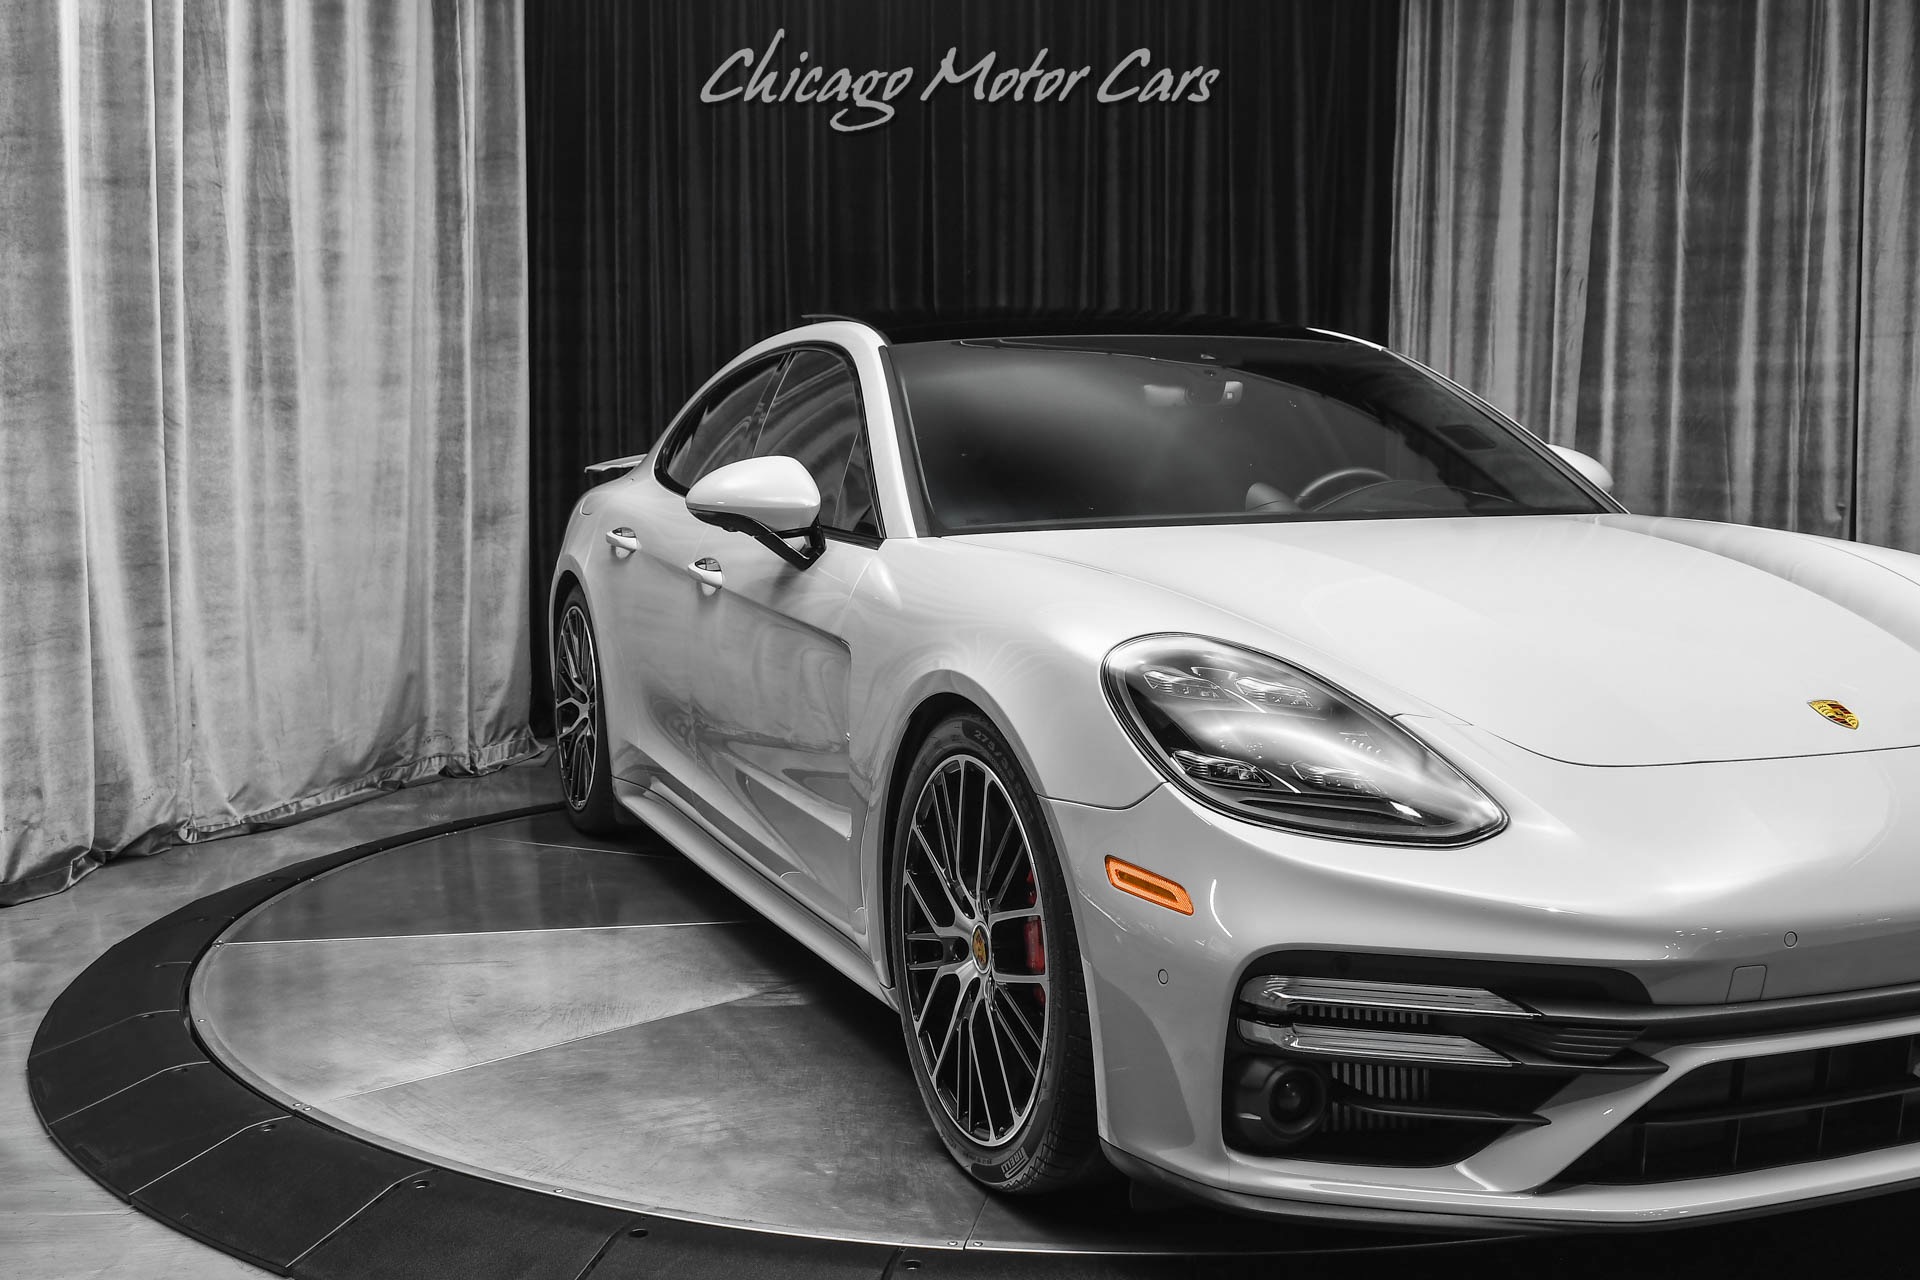 Used-2021-Porsche-Panamera-Turbo-S-E-Hybrid-MSRP-221k-Only-10k-miles-Loaded-Perfect